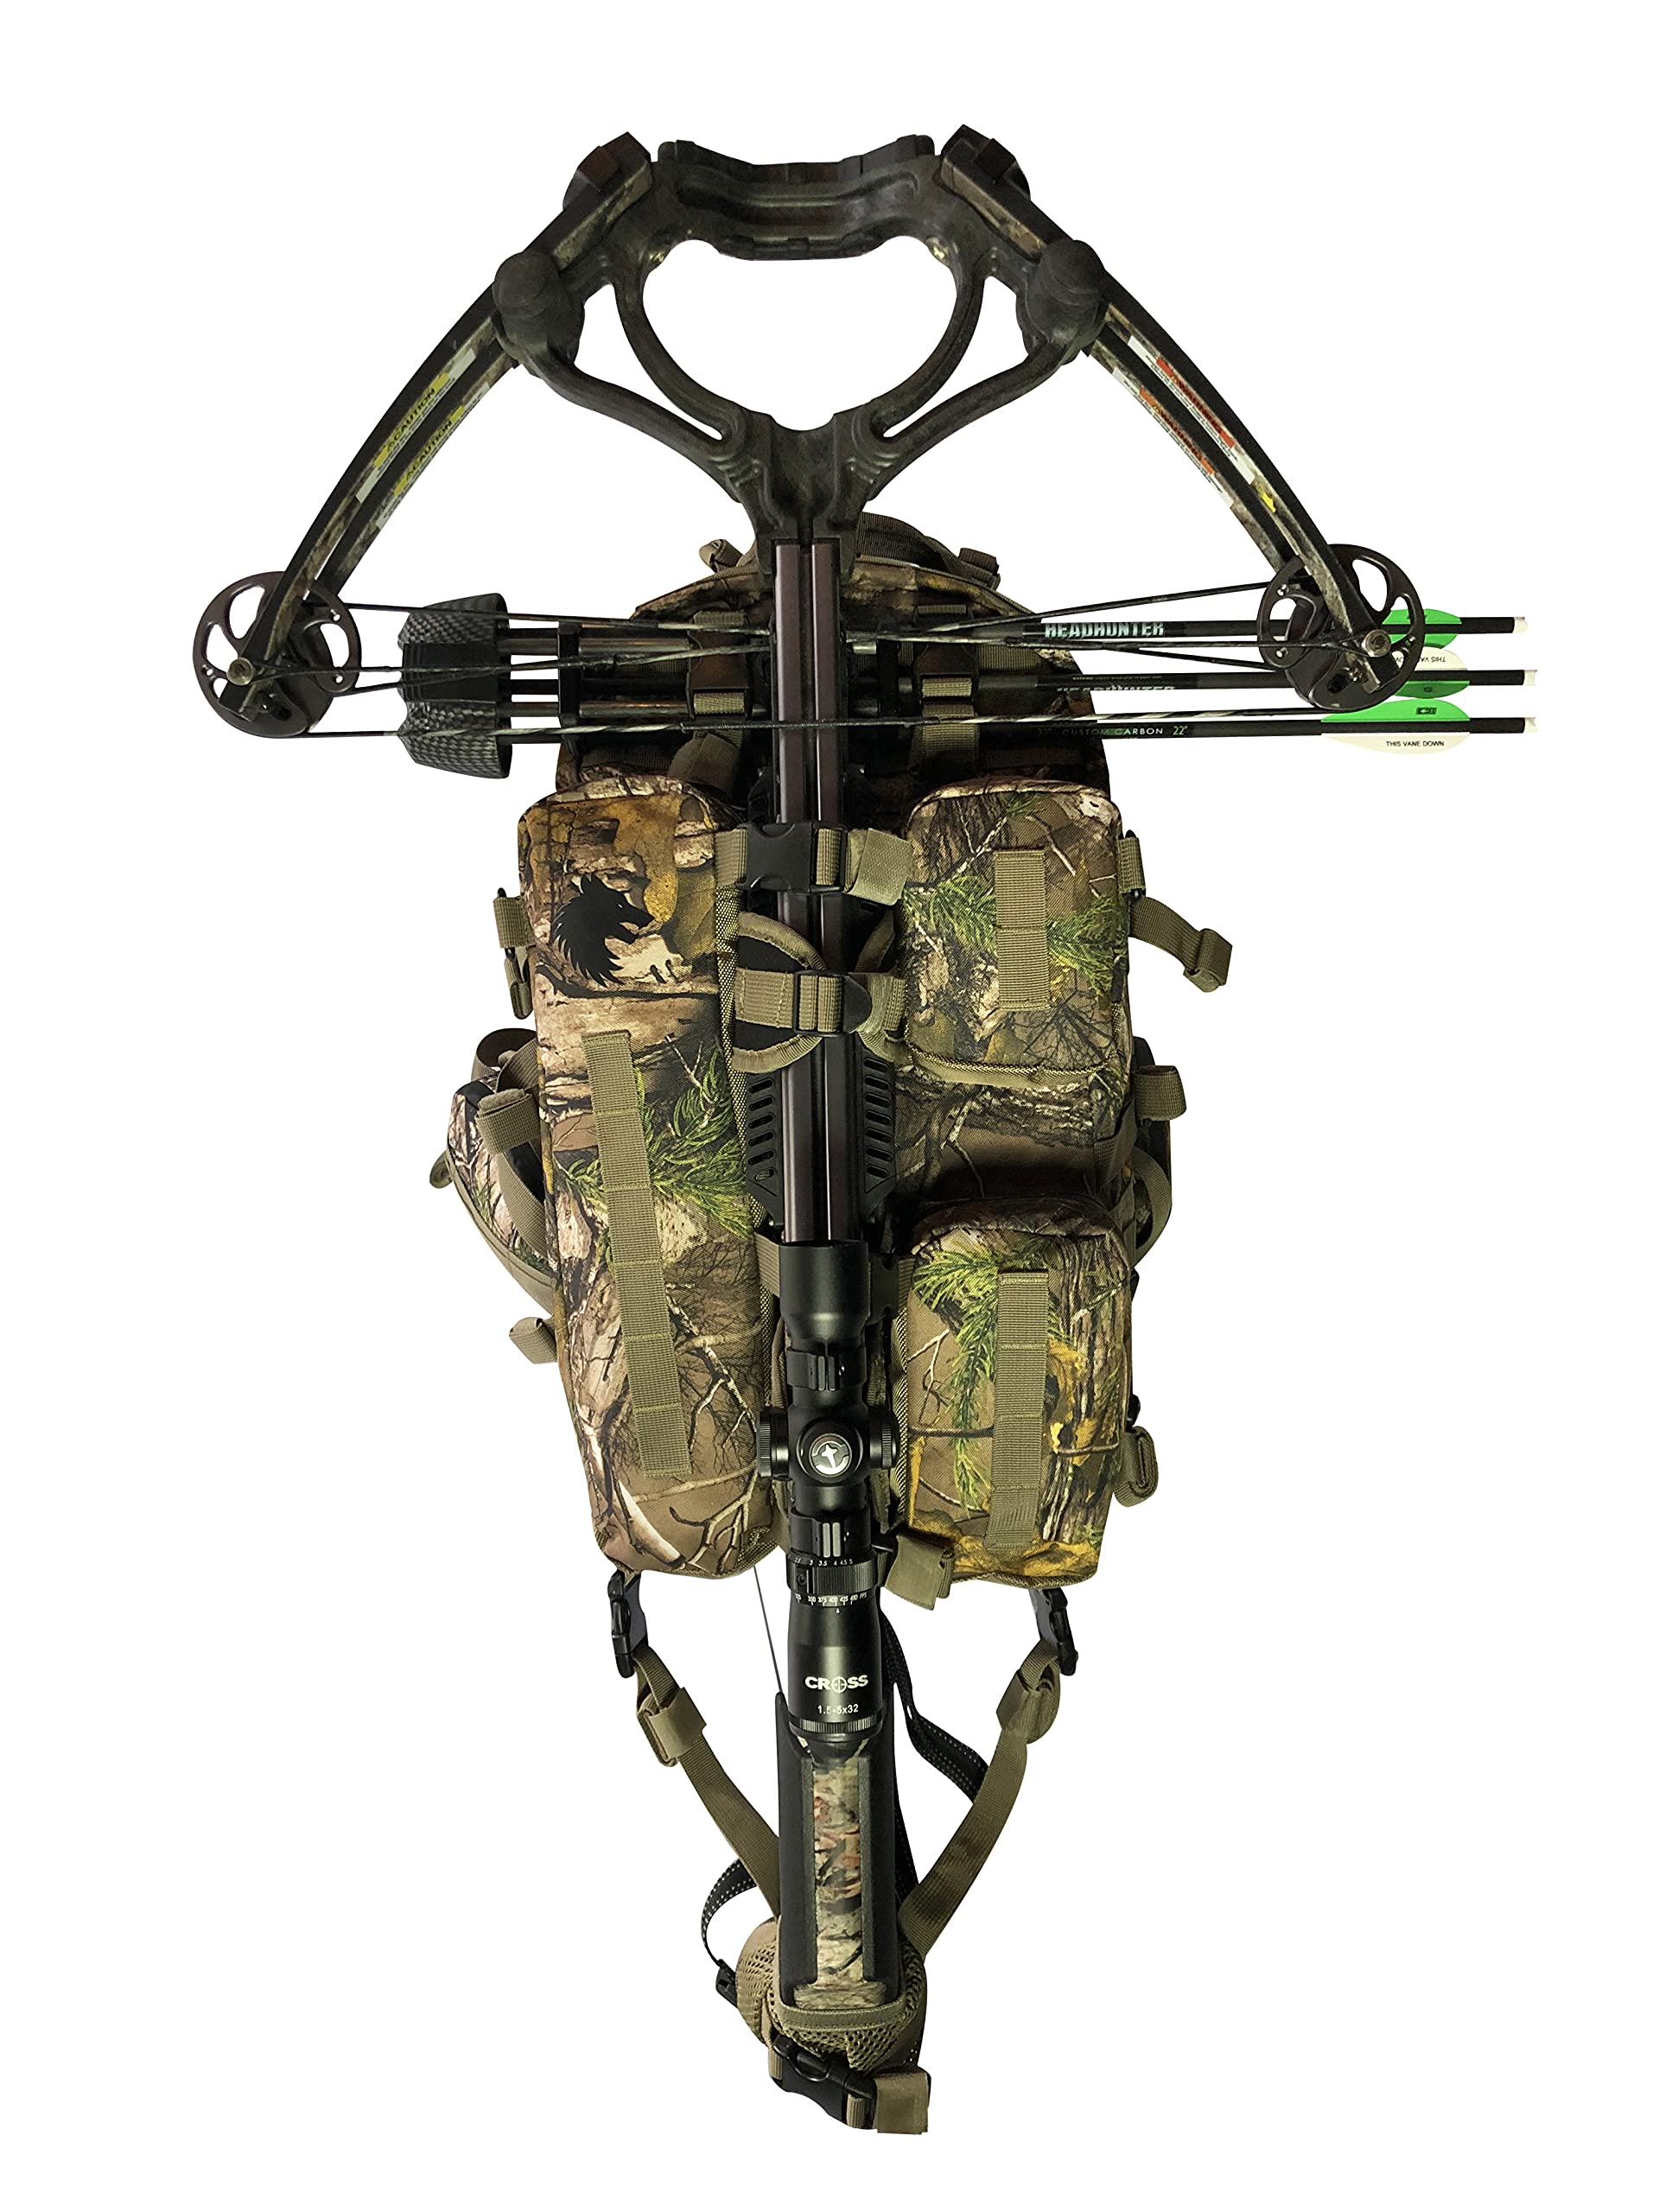 FIELDCRAFT Backpack Daypack for Rifles, Bows, Crossbows, Muzzleloader, Hunting, Hiking, Archery, Blackpowder, Outdoors Expeditionary Alpha Pack